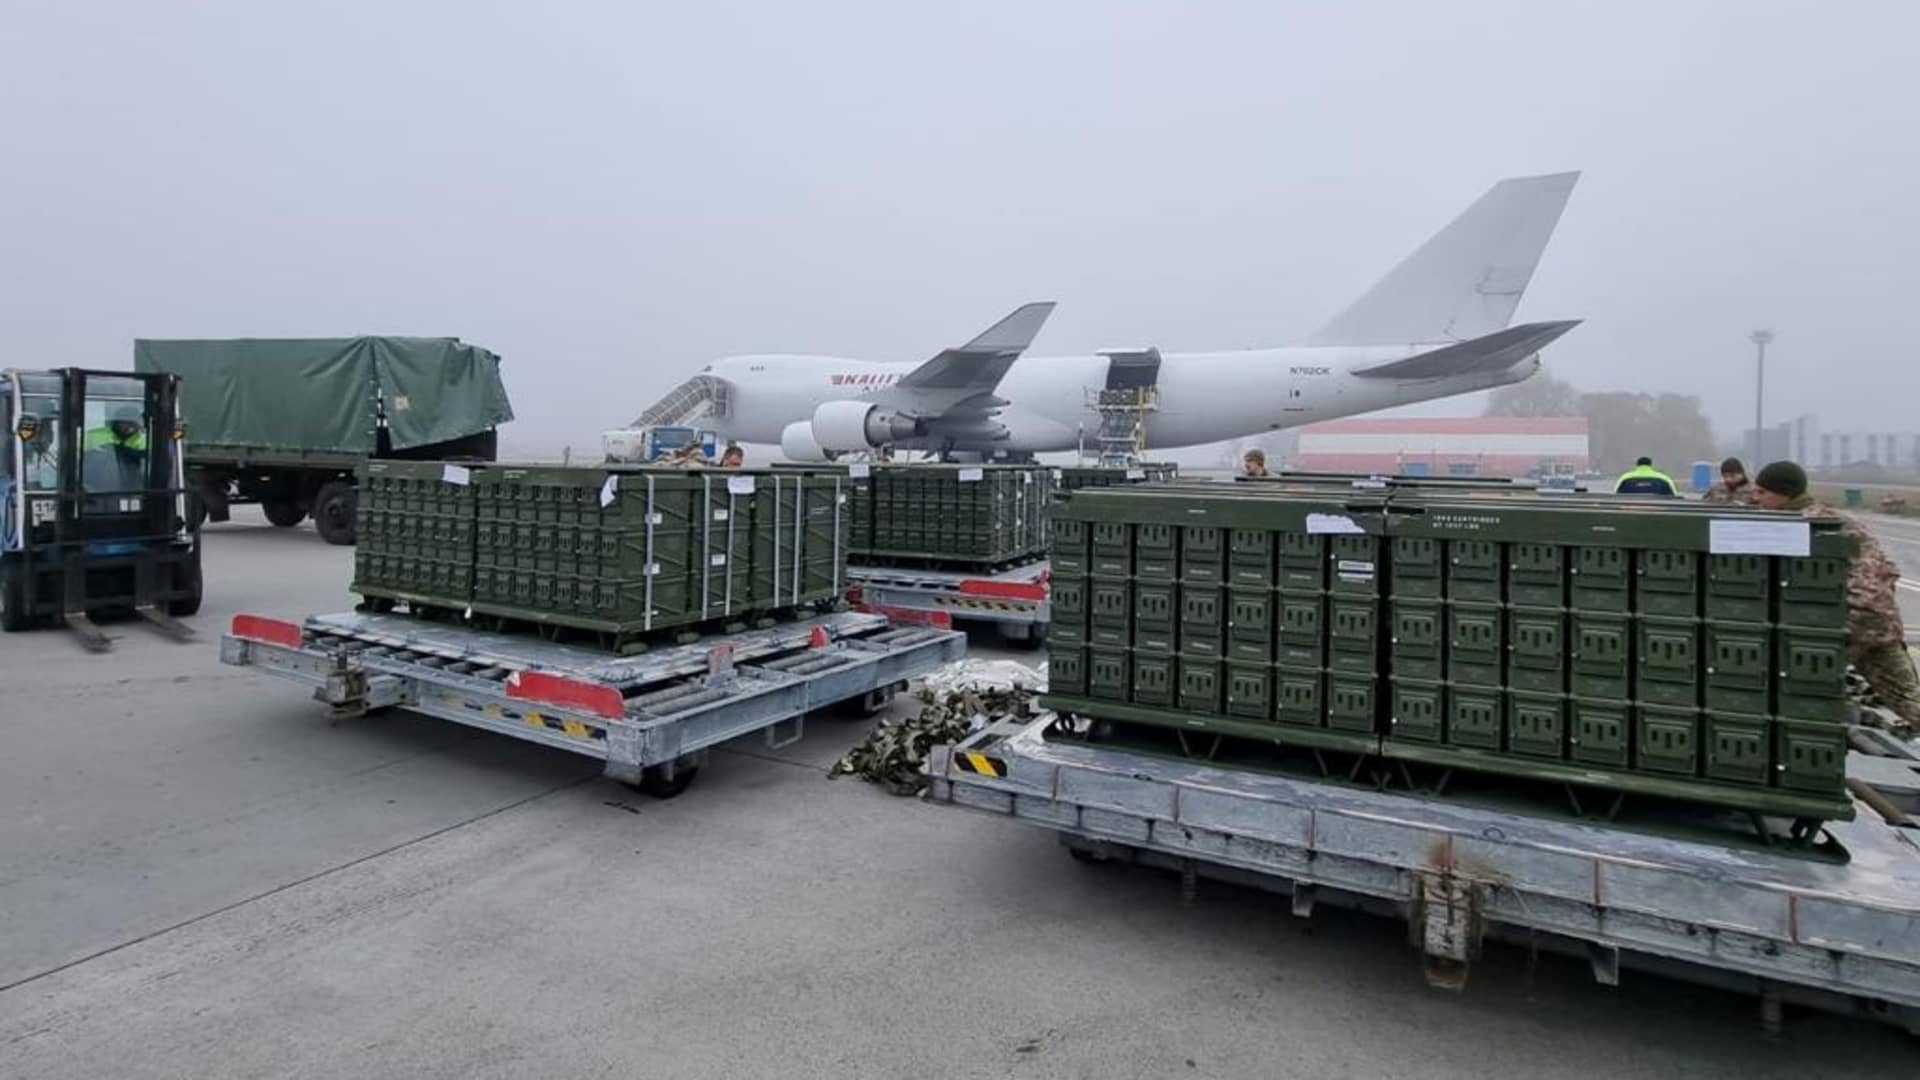 Workers and Ukrainian servicemen unload a shipment of ammunition delivered as part of the United States of America's security assistance to Ukraine, at the Boryspil International Airport outside Kyiv, Ukraine November 14, 2021.